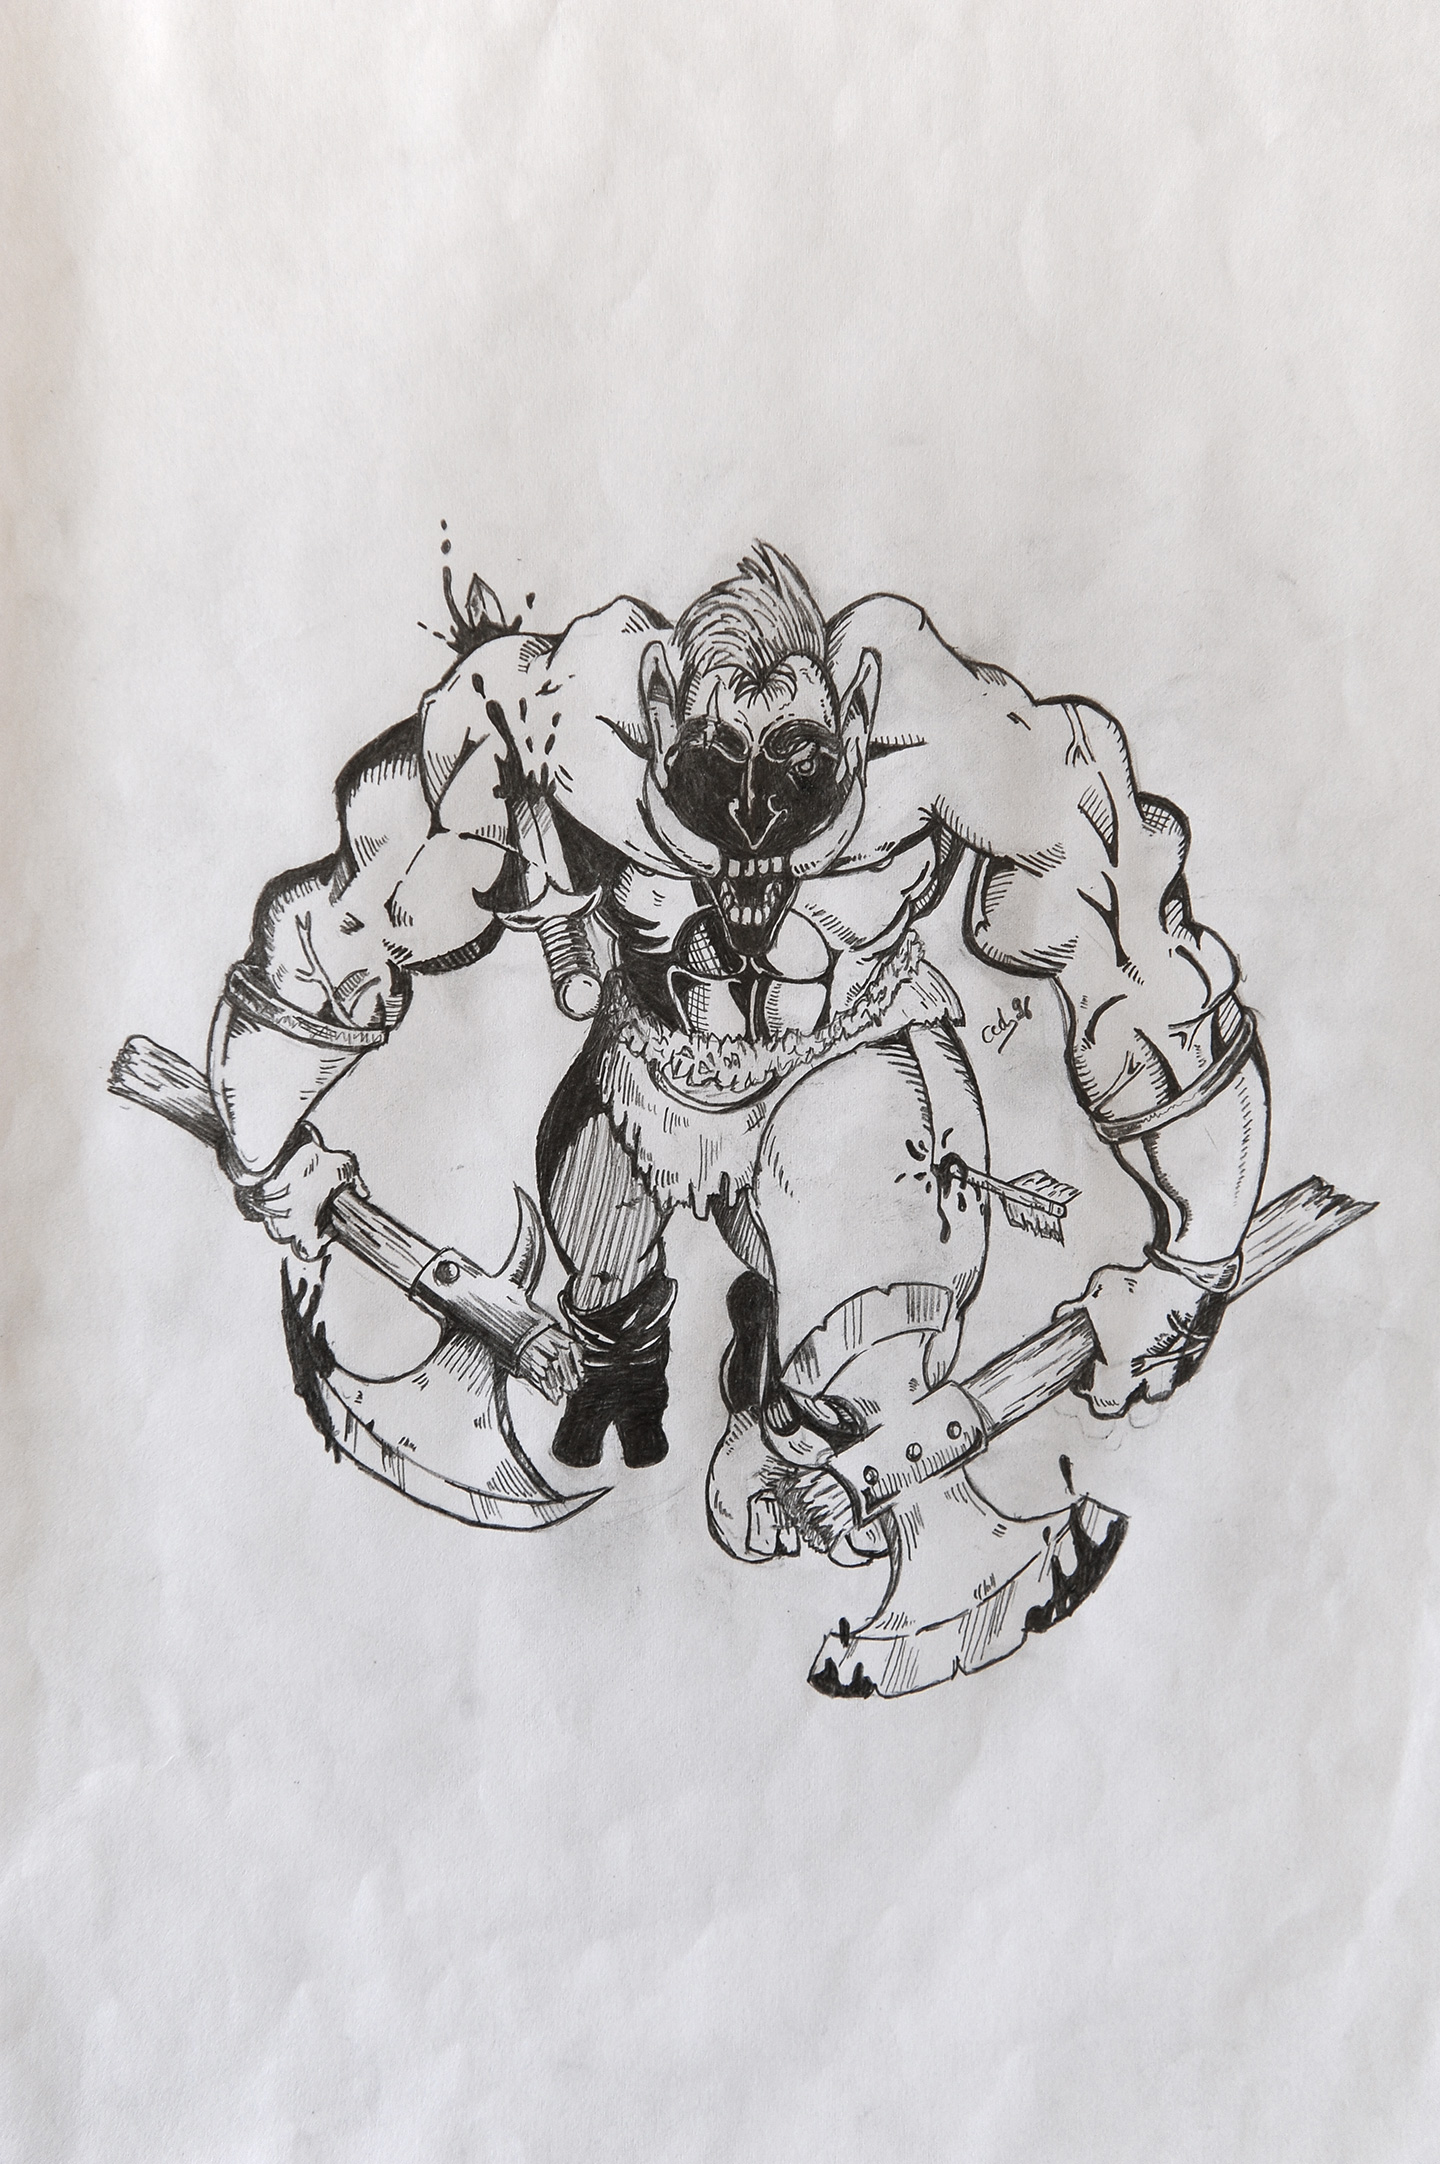 A drawing about an orc from Warcraft II